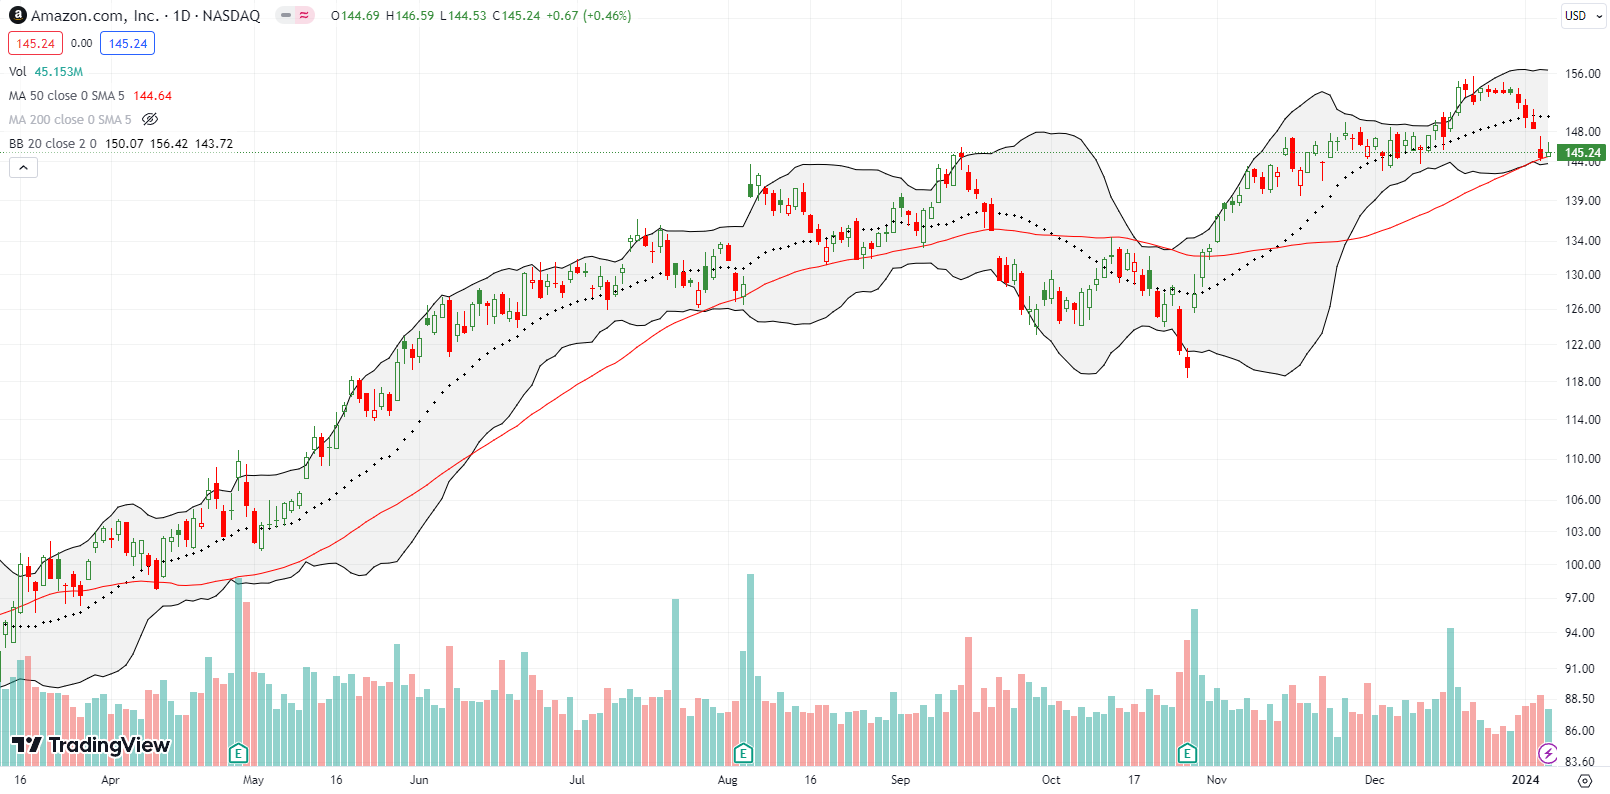 Amazon.com Inc (AMZN) is struggling to cling to 50DMA support.